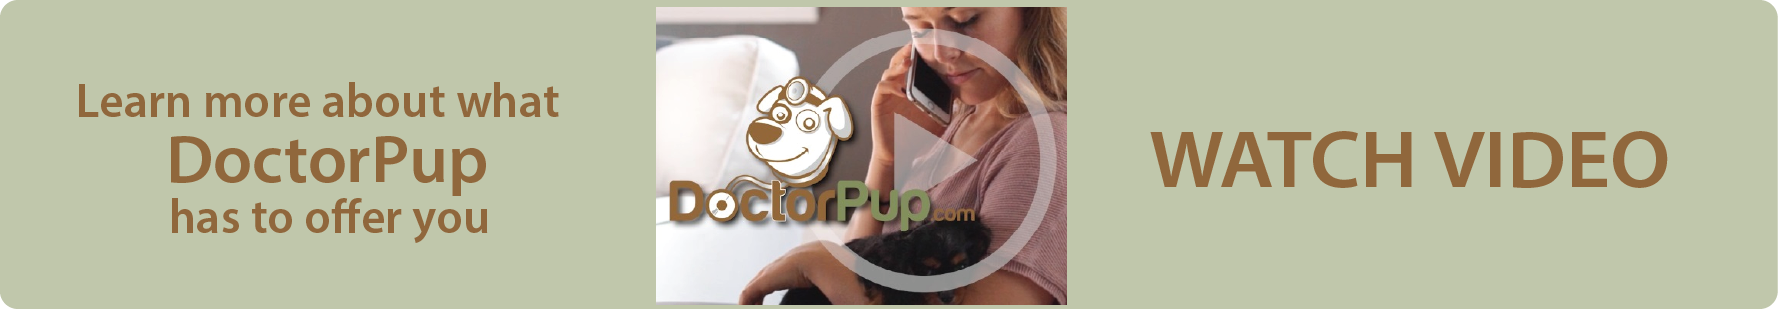 See what DoctorPup can do for you